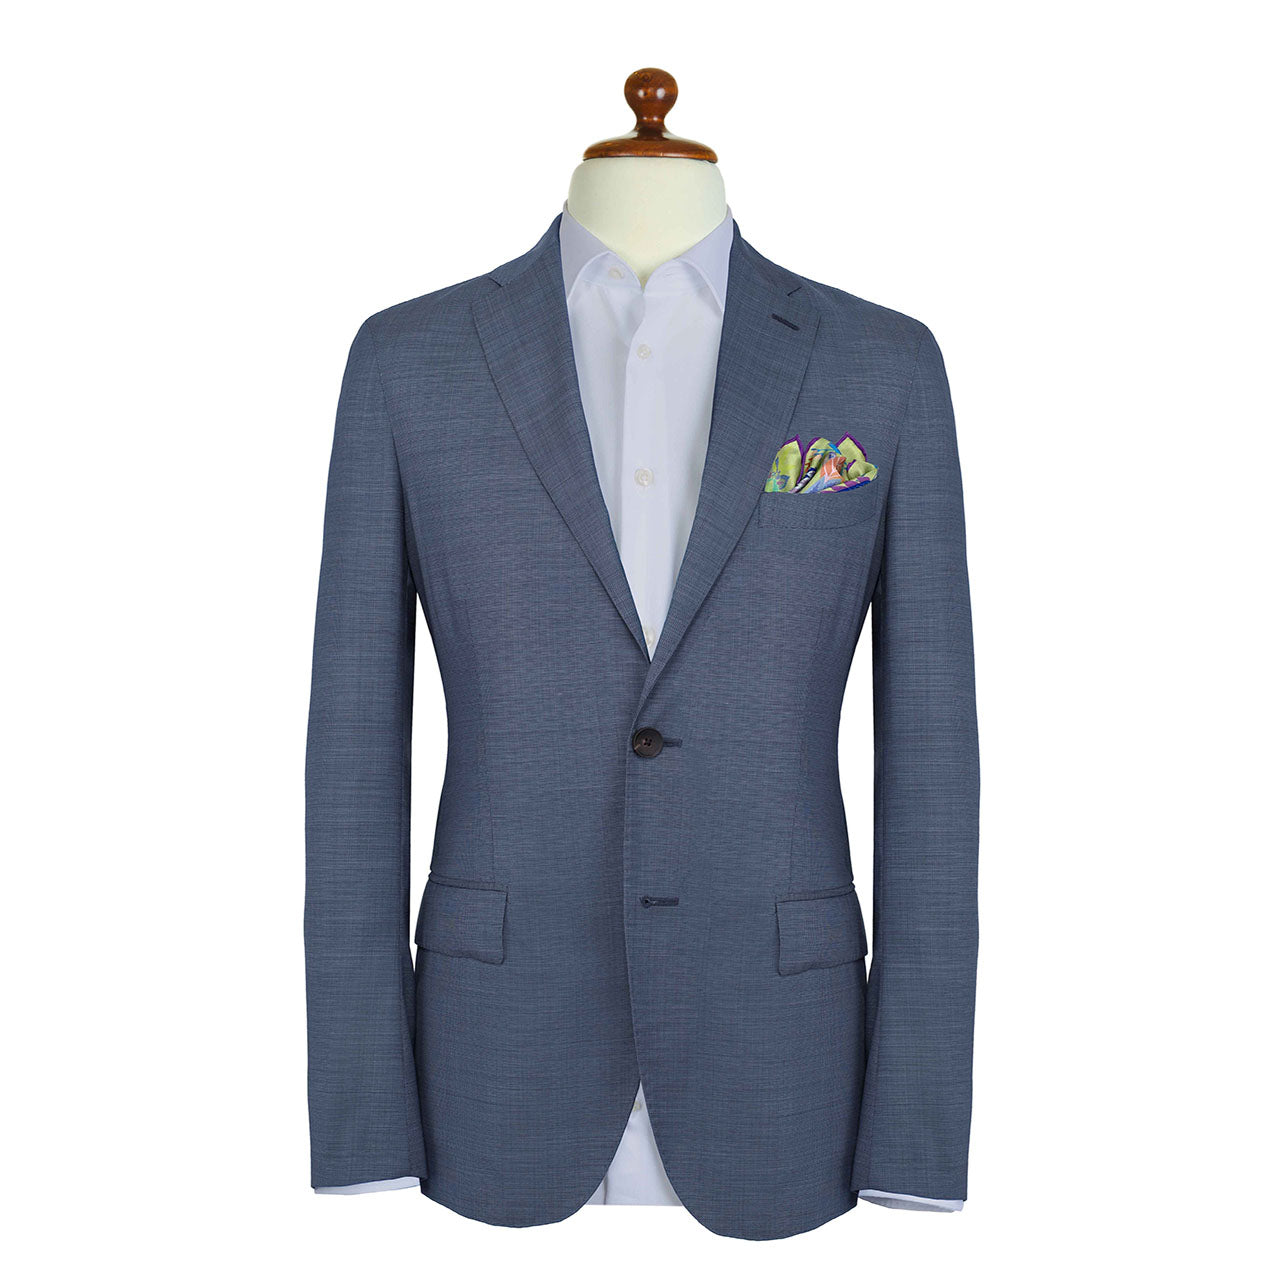 Dragonfly Chaser Purple Pocket Square